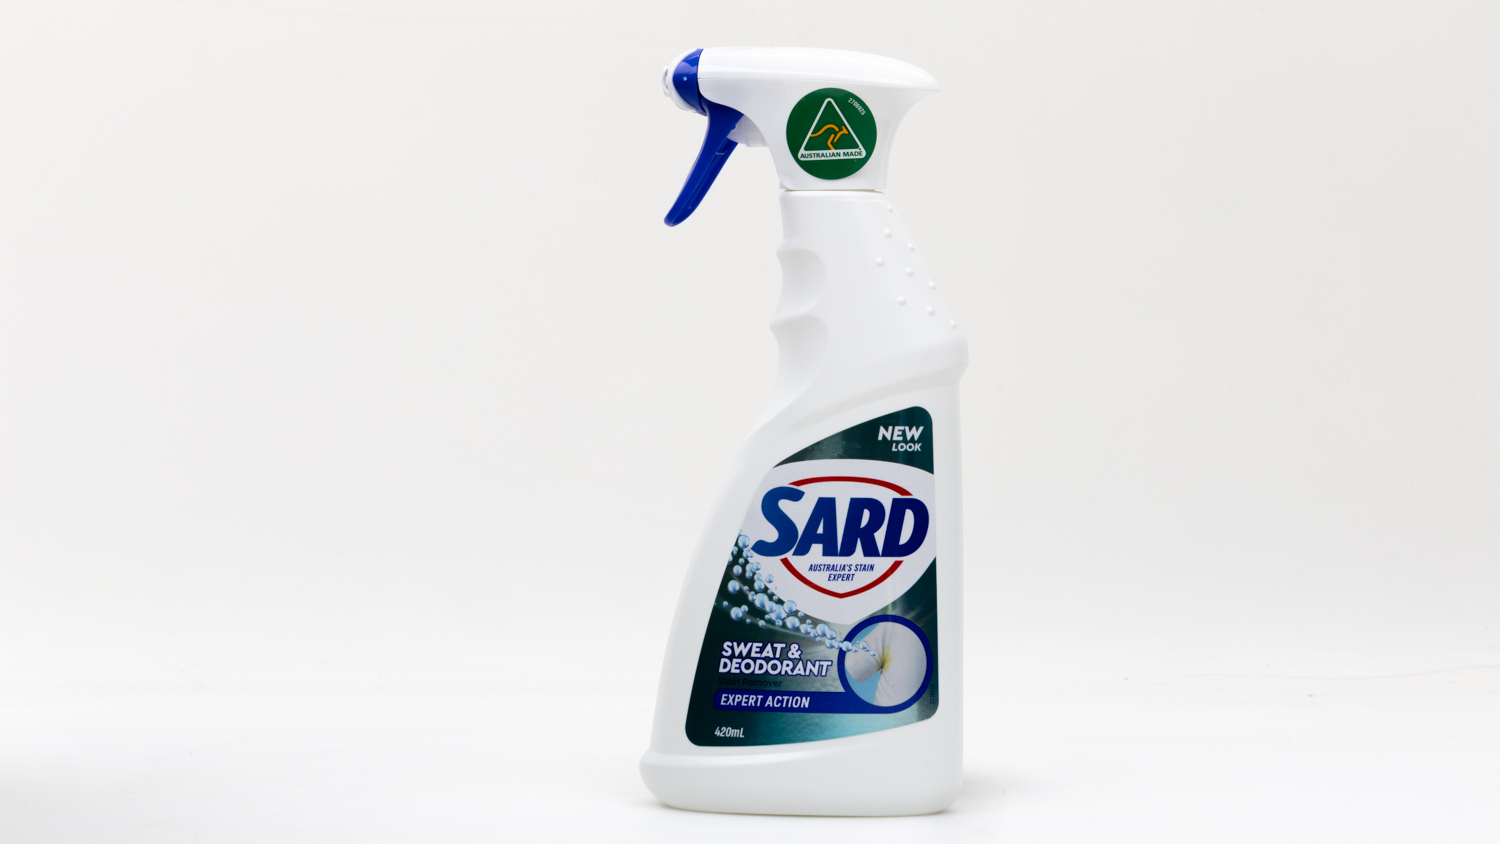 Sard Sweat and Deodorant Stain Remover Expert Action carousel image